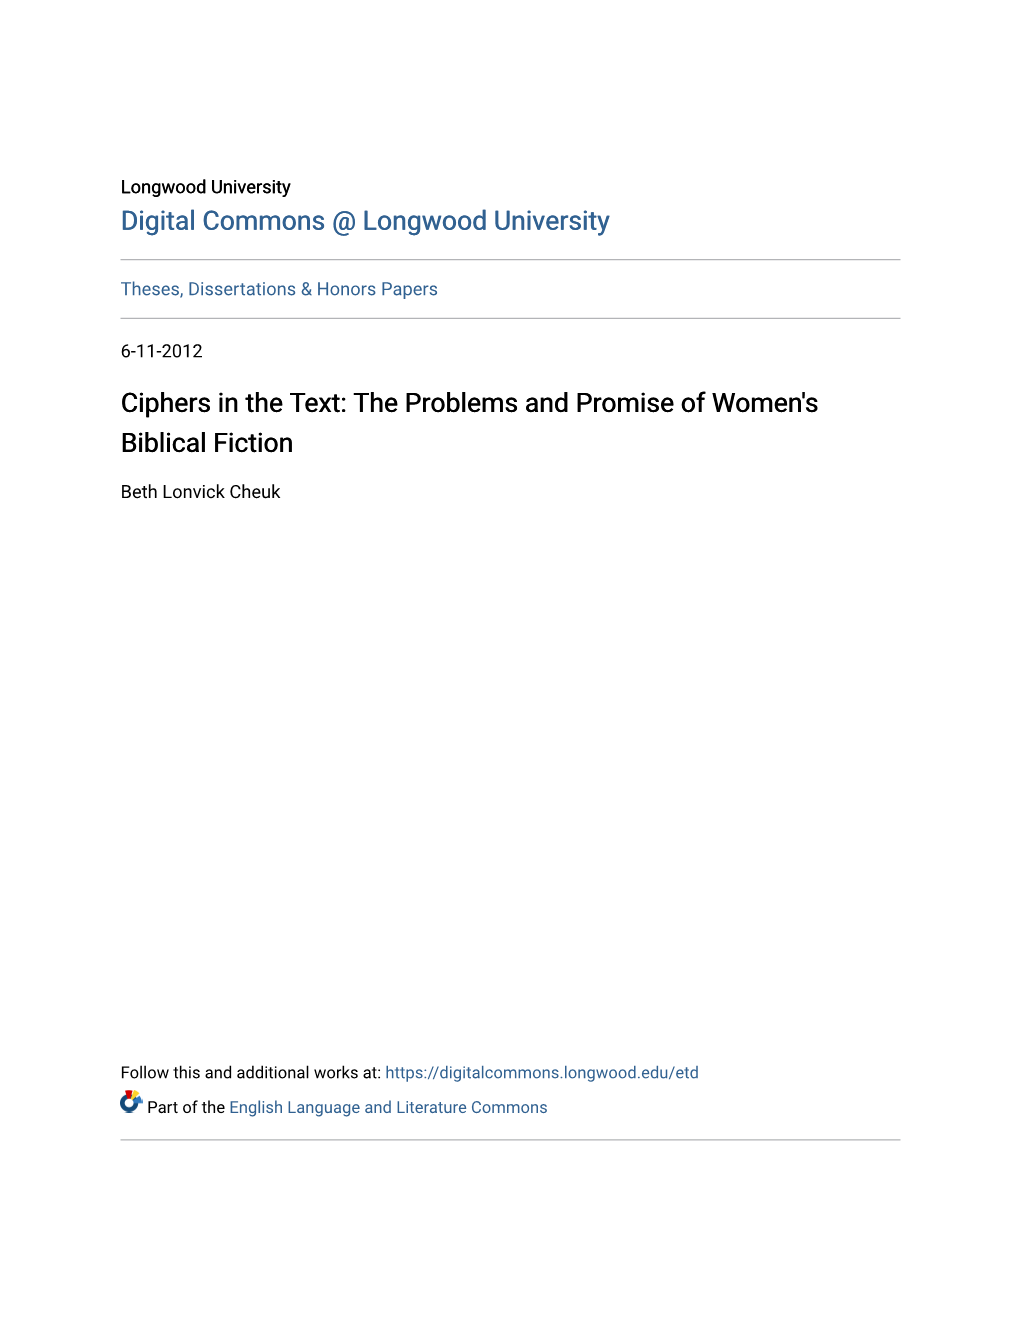 Ciphers in the Text: the Problems and Promise of Women's Biblical Fiction